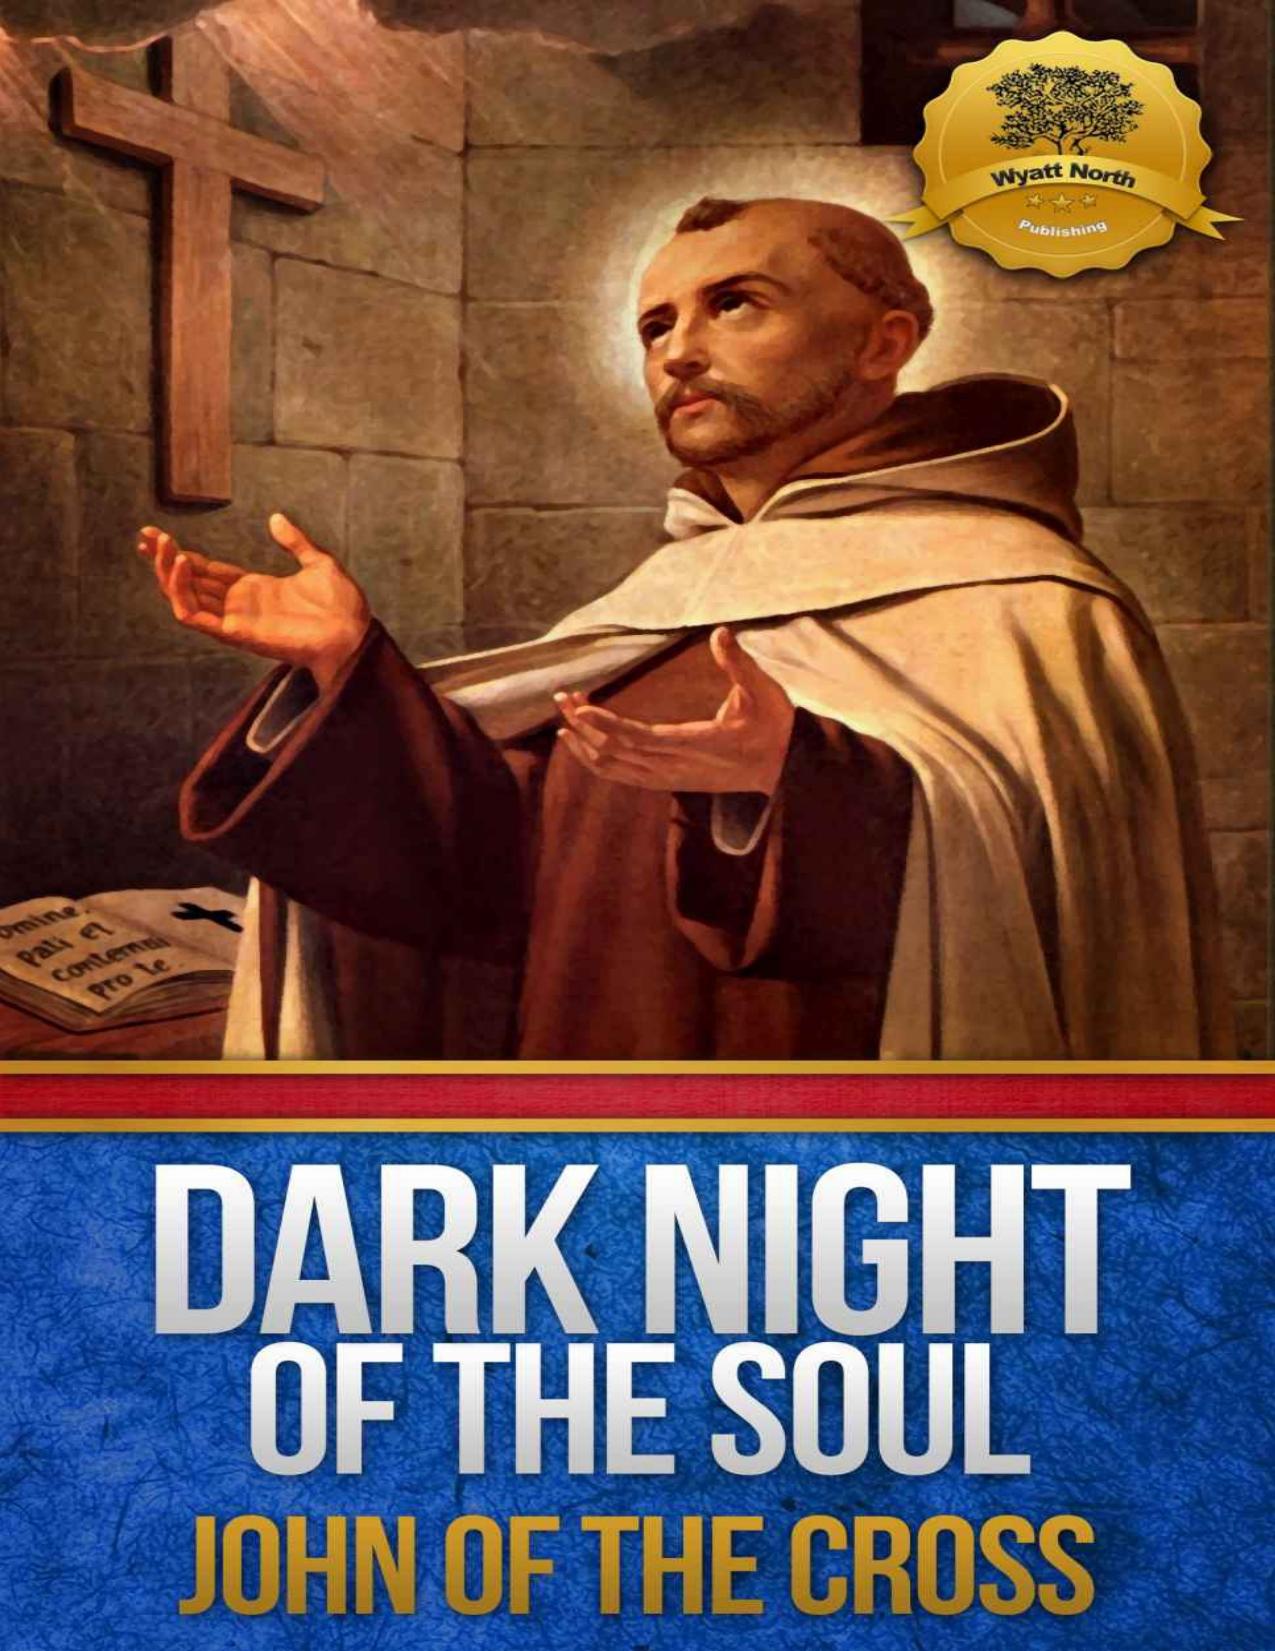 Dark Night of the Soul (Annotated) by St. John of the Cross & Wyatt North